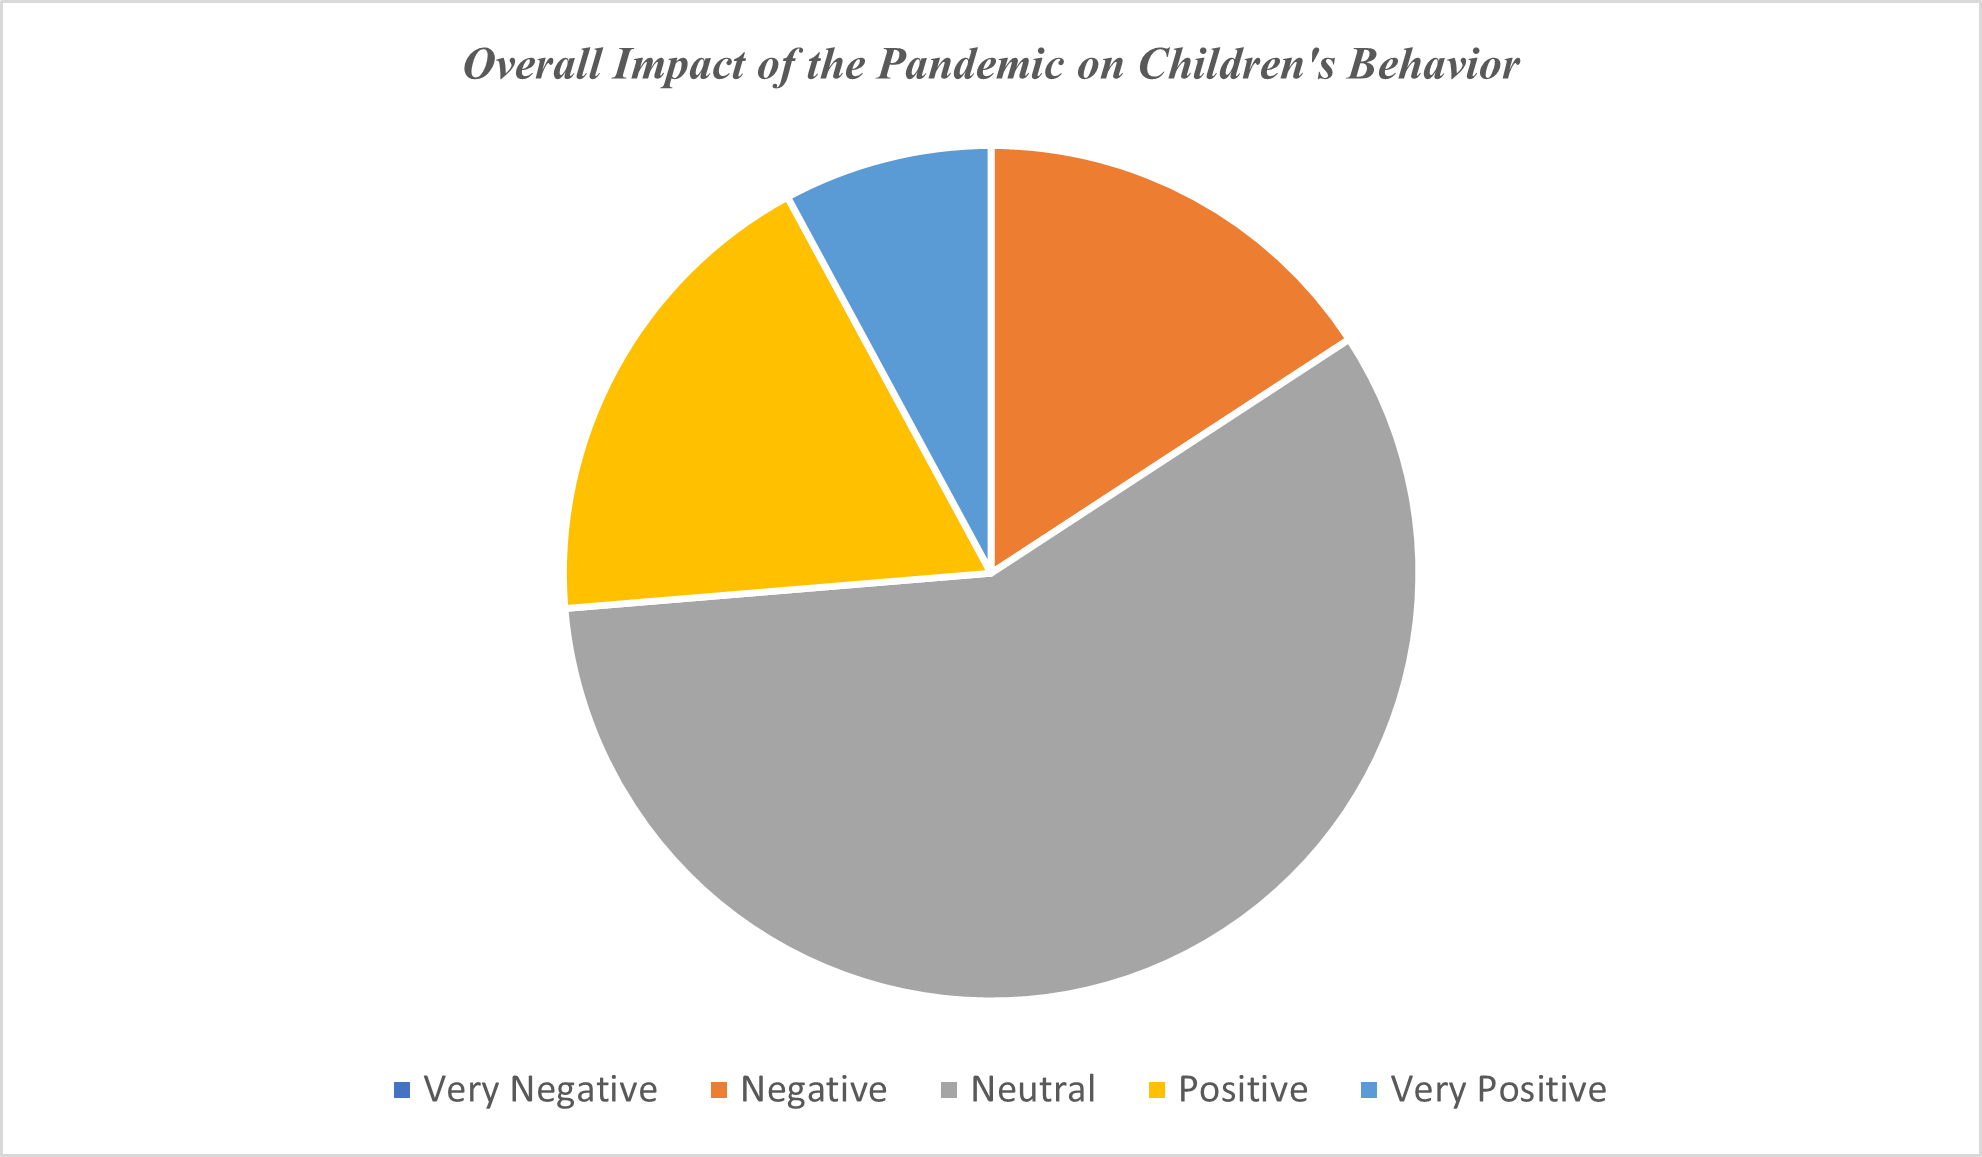 How would you rate the overall impact of the pandemic on your child's behavior?